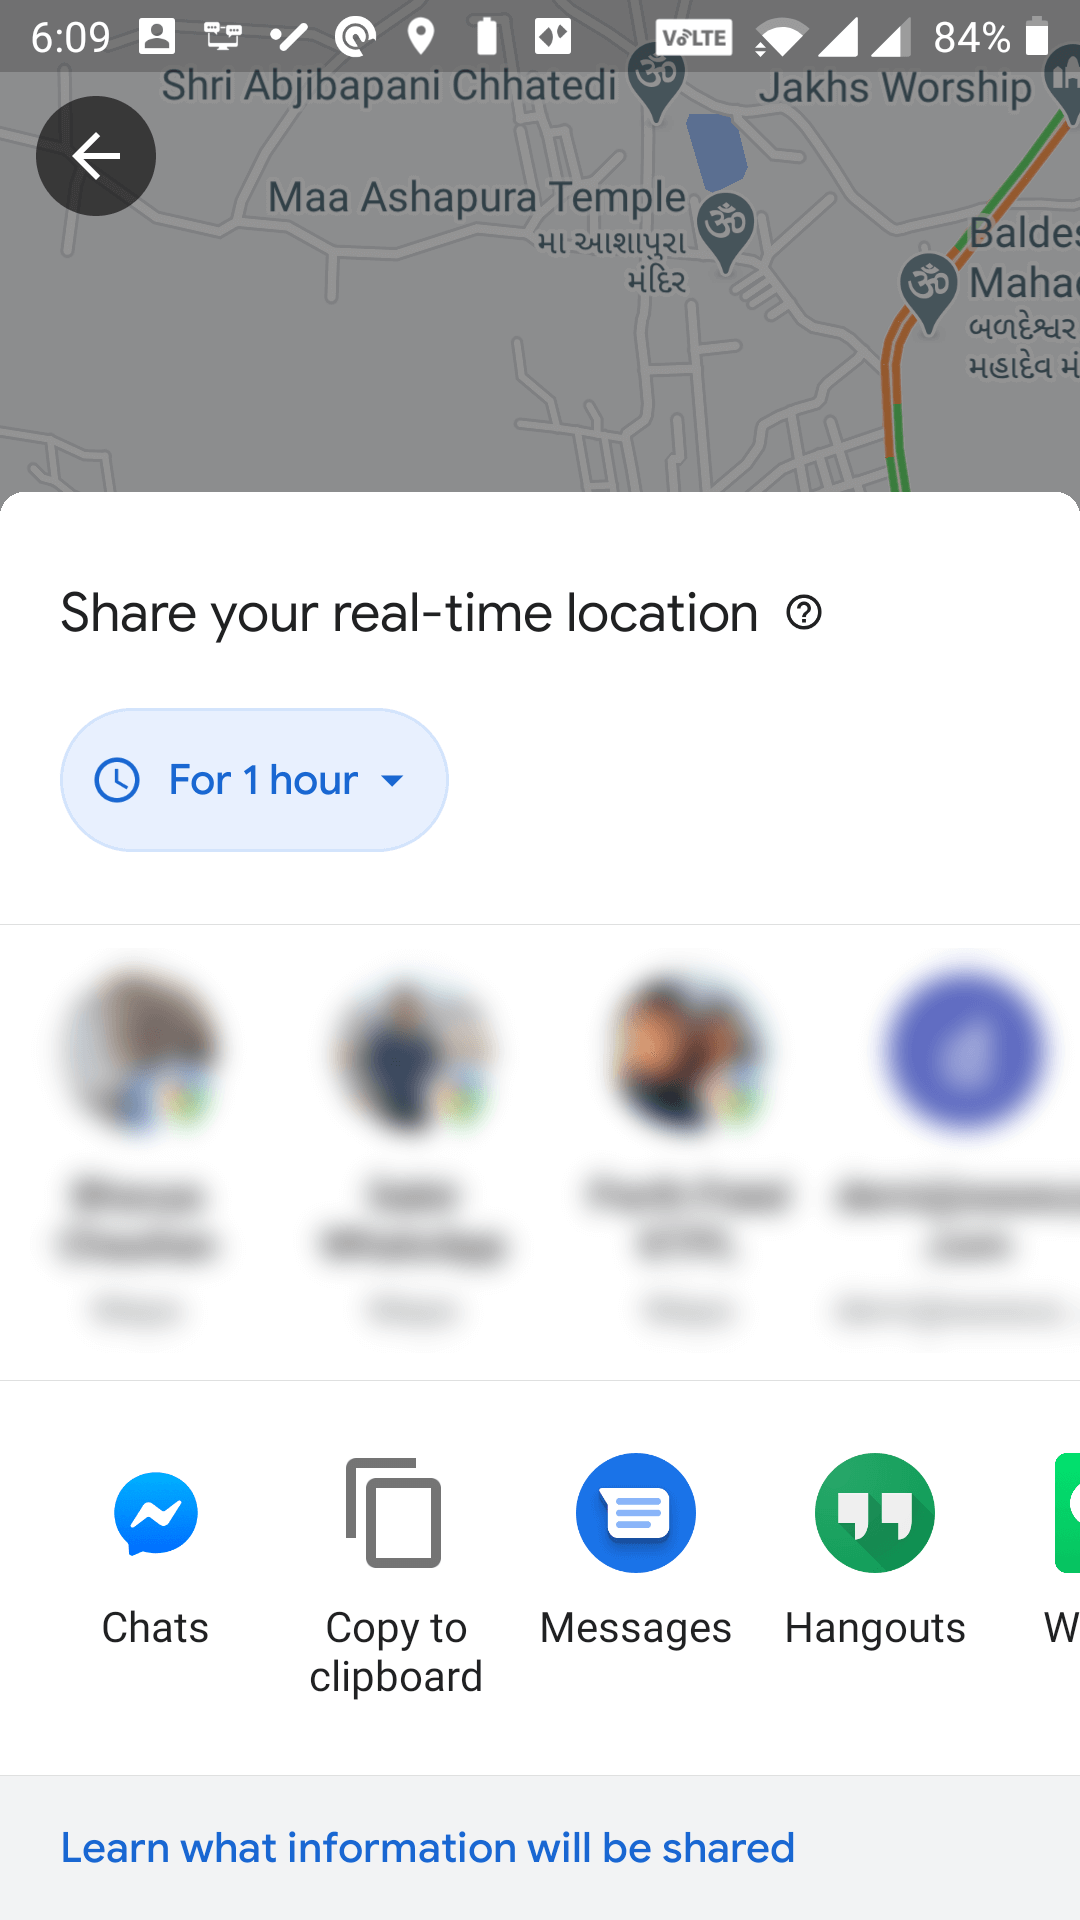 get shareable location link